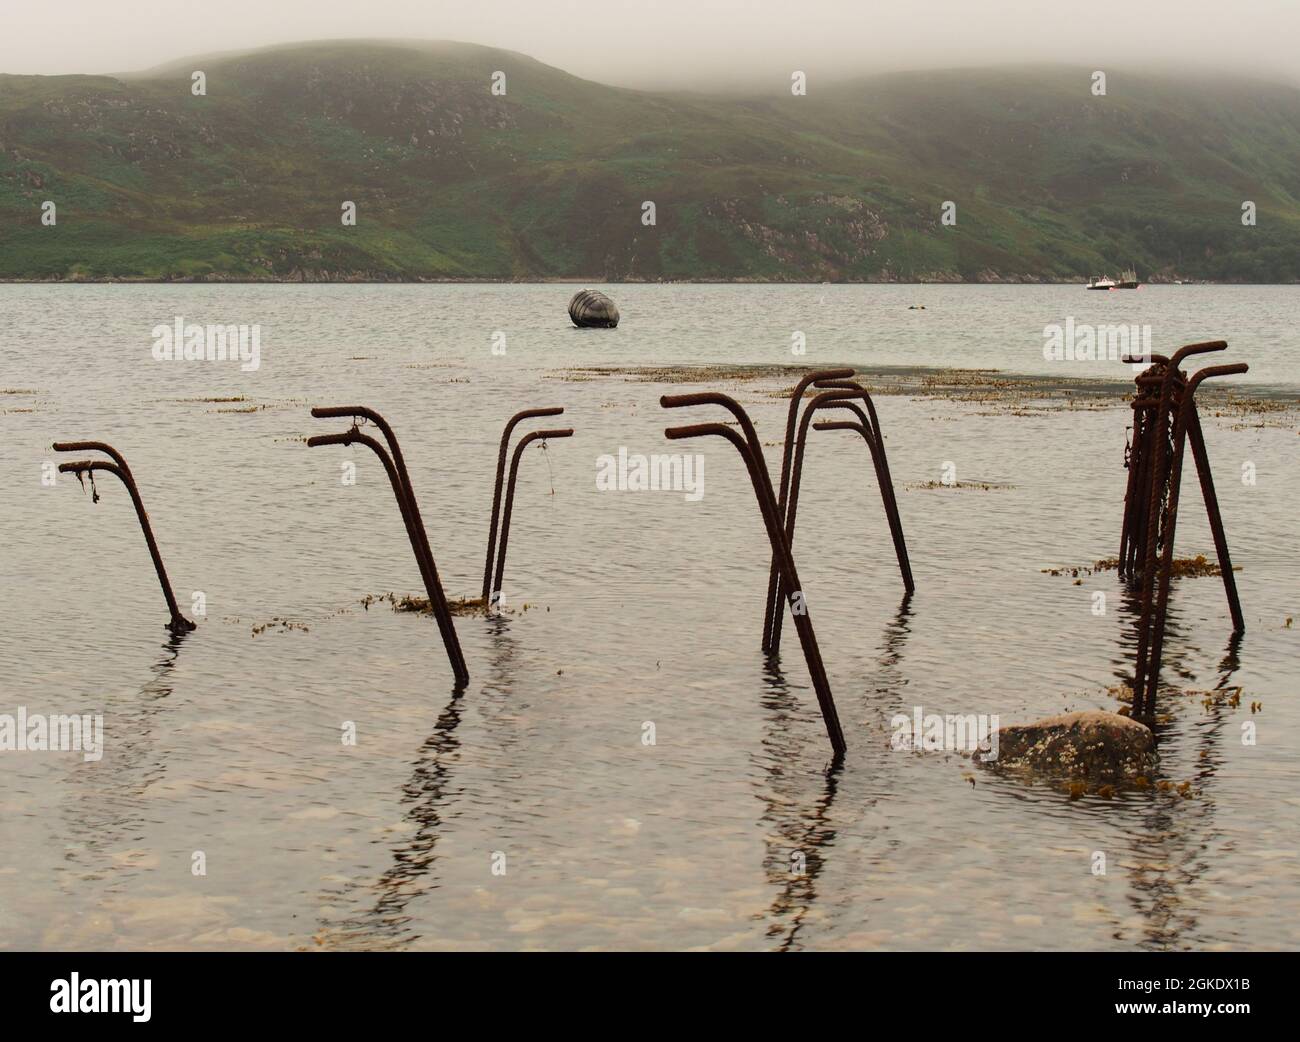 A view of disused oyster farming trestles upended in the Kyle of Durness Stock Photo